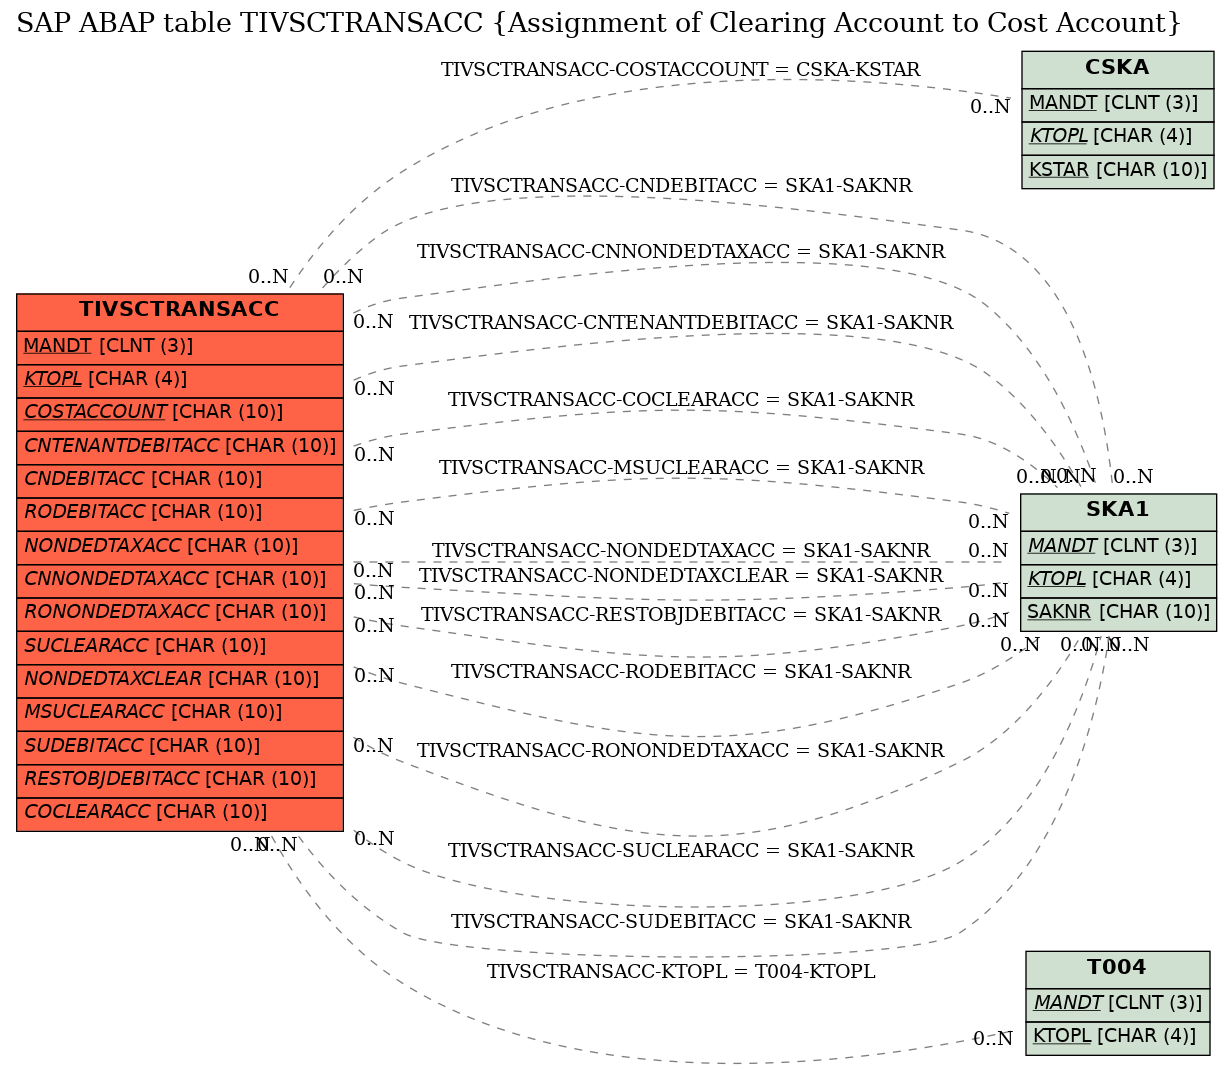 E-R Diagram for table TIVSCTRANSACC (Assignment of Clearing Account to Cost Account)